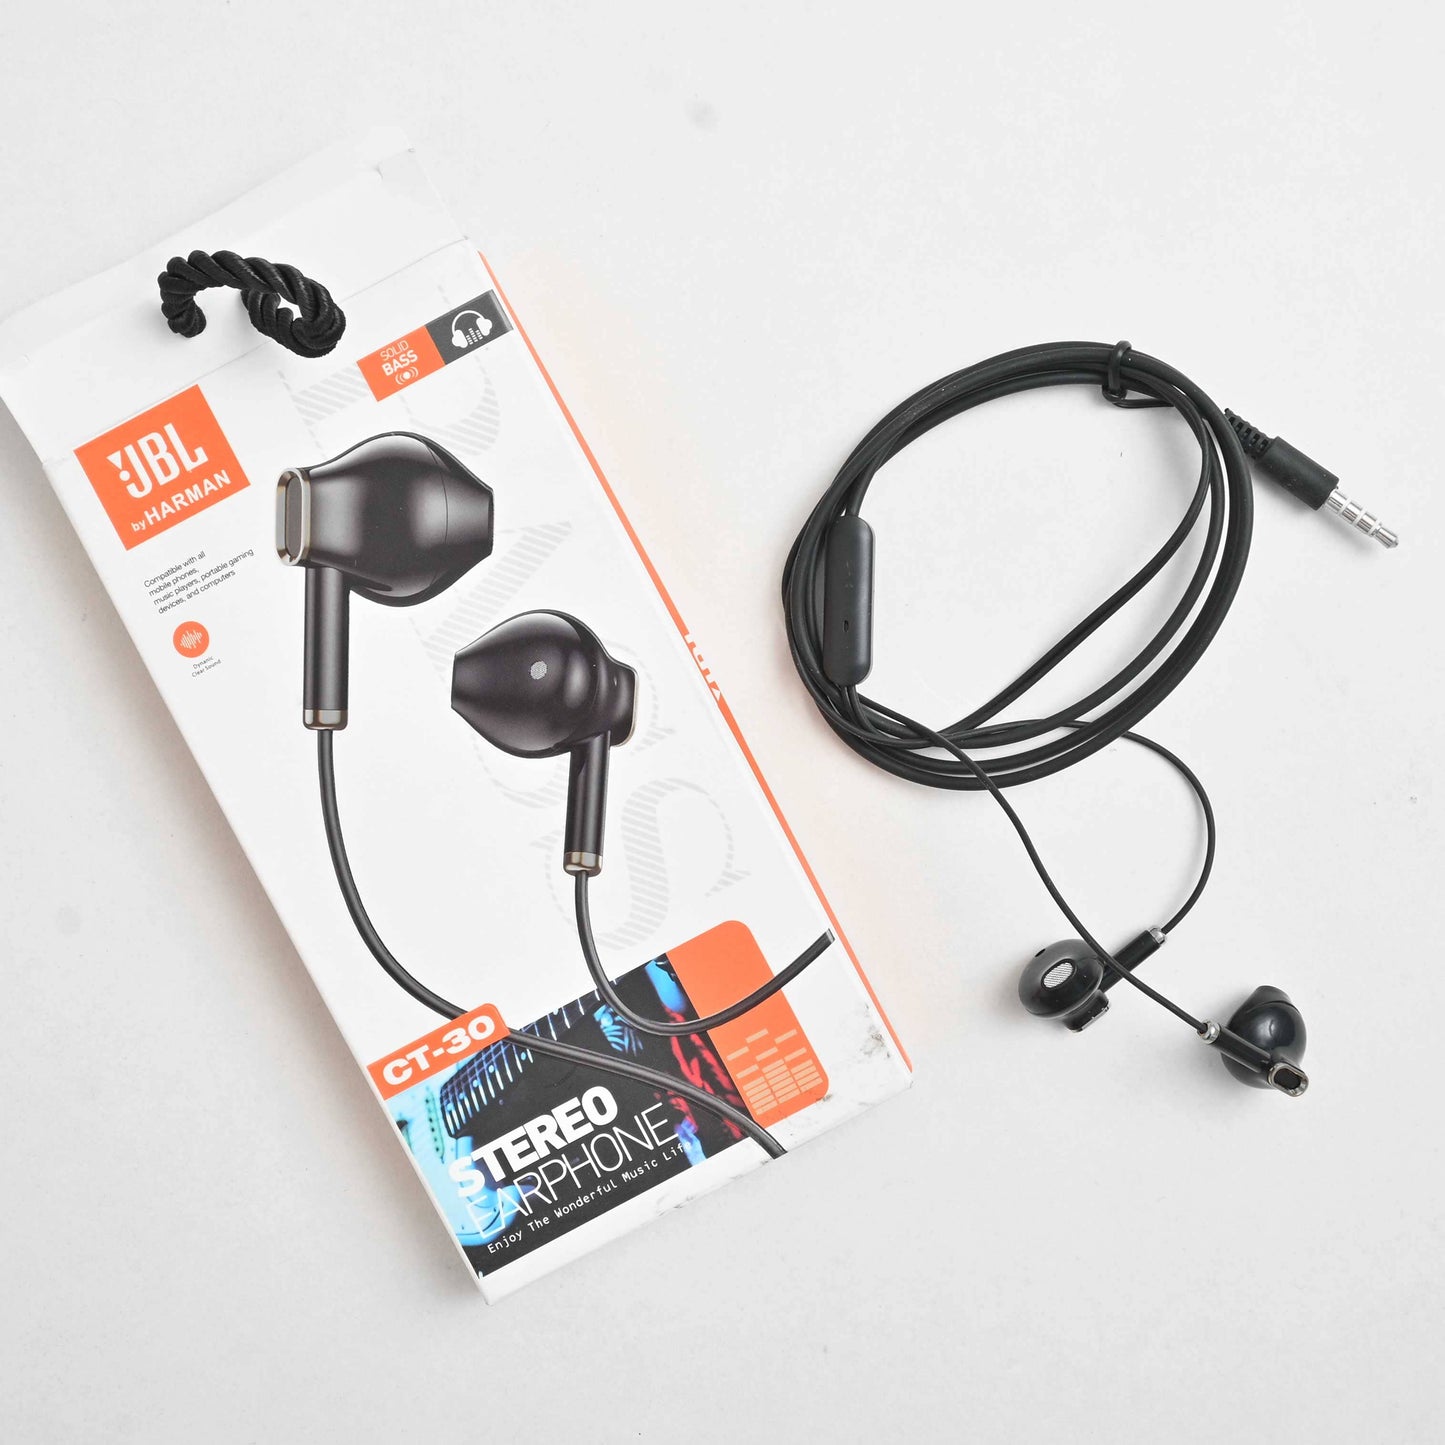 Solid Bass Portable Stero Earphones Mobile Accessories CPUS Black 